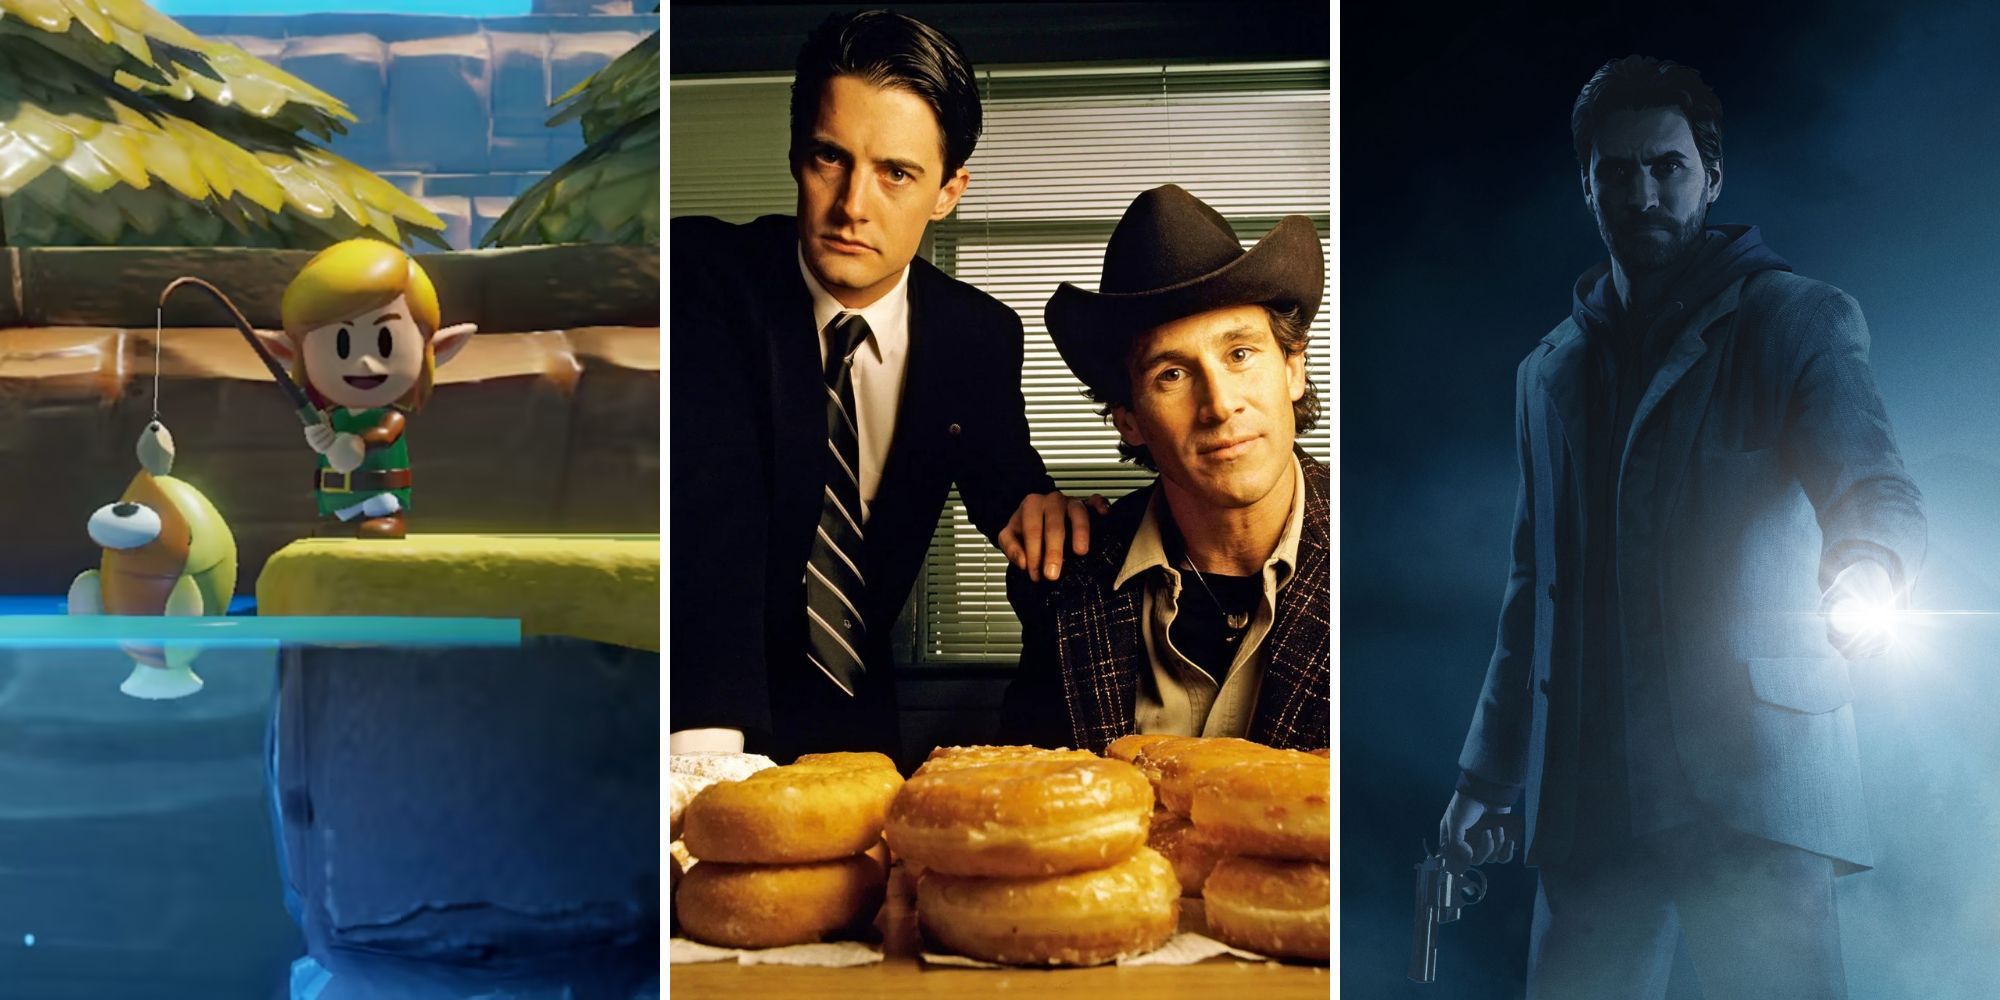 Link pulls a fish out from a pond, Dale and Harry sit in front of donuts, Alan Wake holds a flashlight